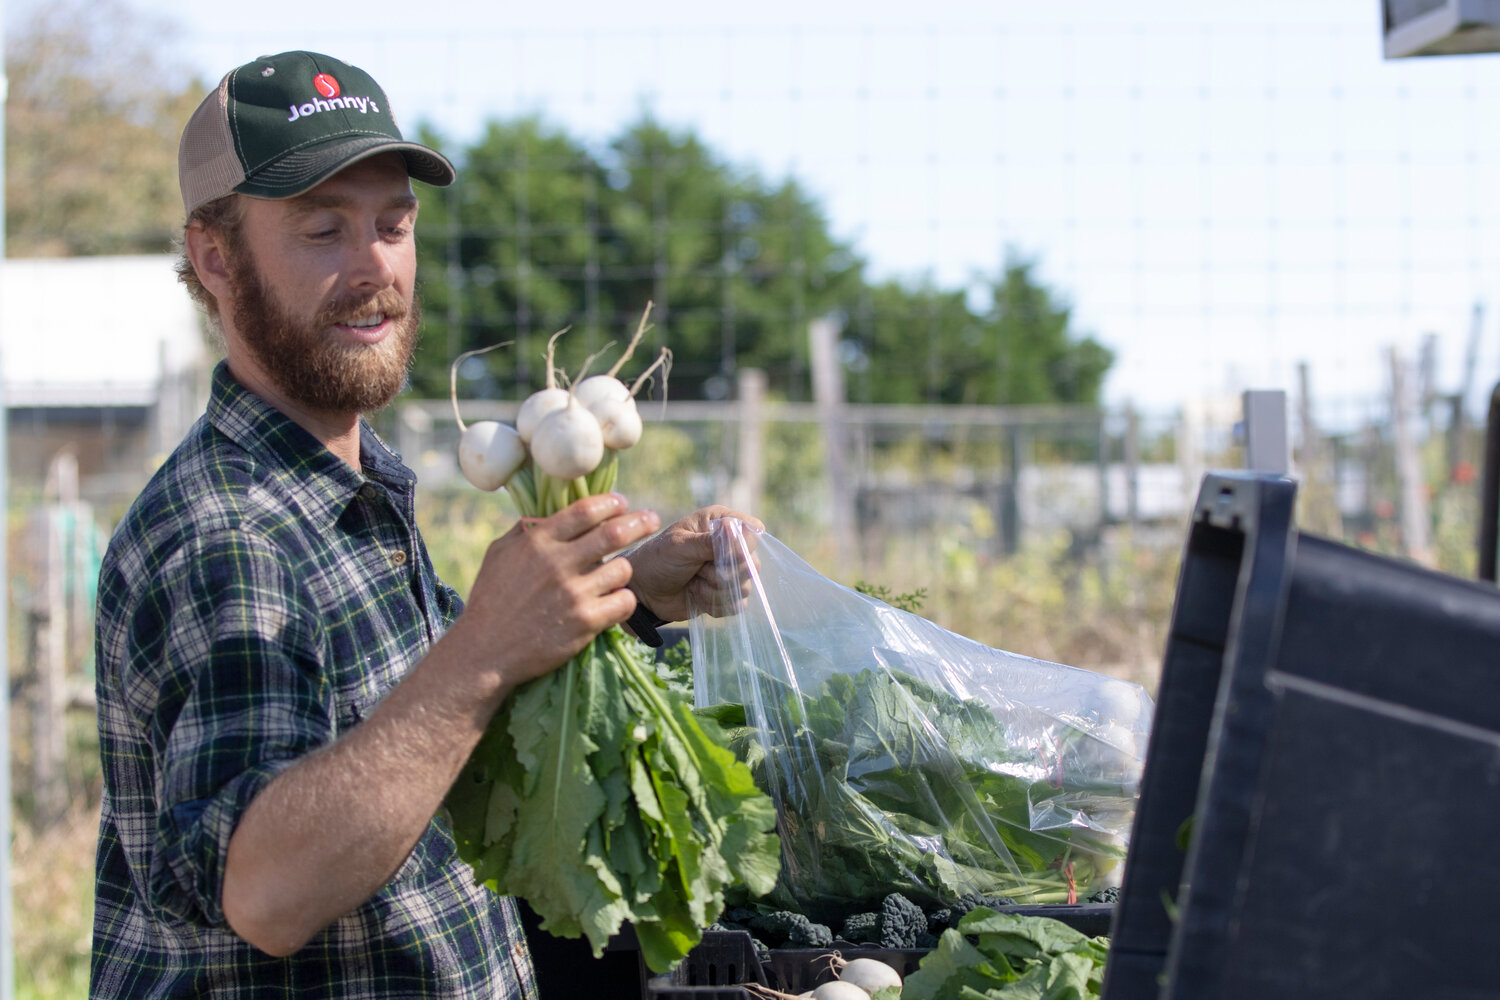 Aidan Feeney, owner of Fog Town Farm, is hoping to use the new commercial kitchens being installed at The Hive on Amelia Drive to turn some of his harvest into salsas, jellies and kimchi, shelf-stable products that will improve his bottom line.